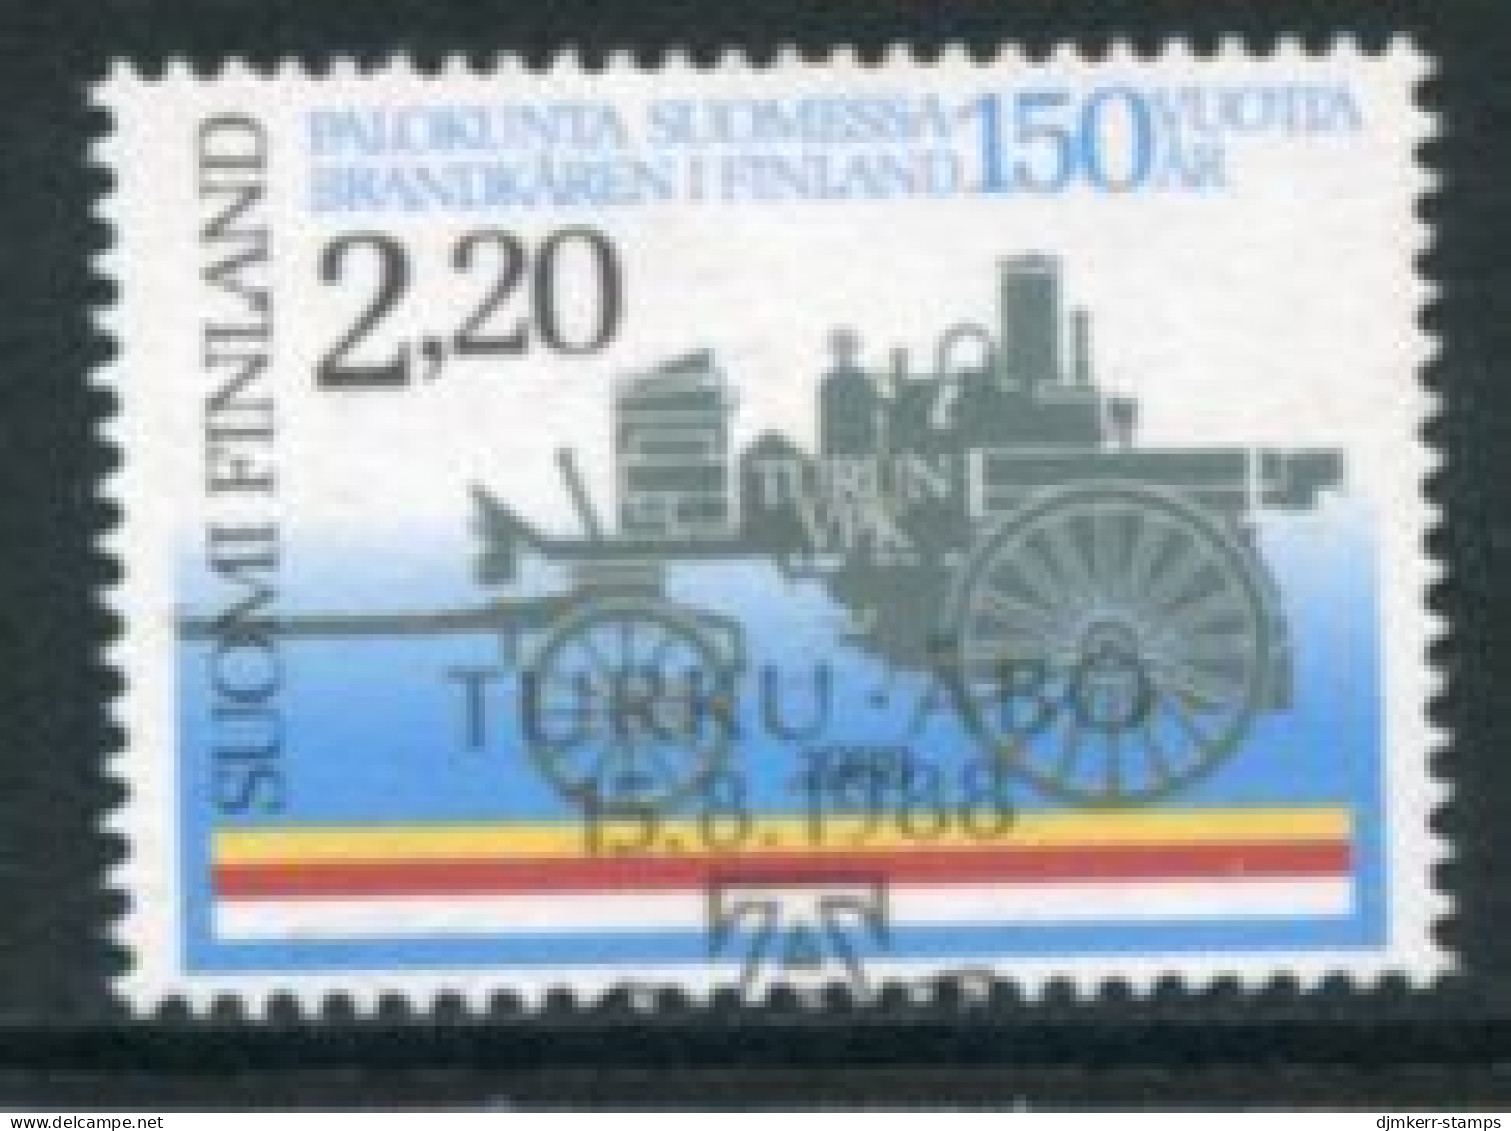 FINLAND 1988 150th Anniversary Of Fire Brigade Used.  Michel 1057 - Used Stamps